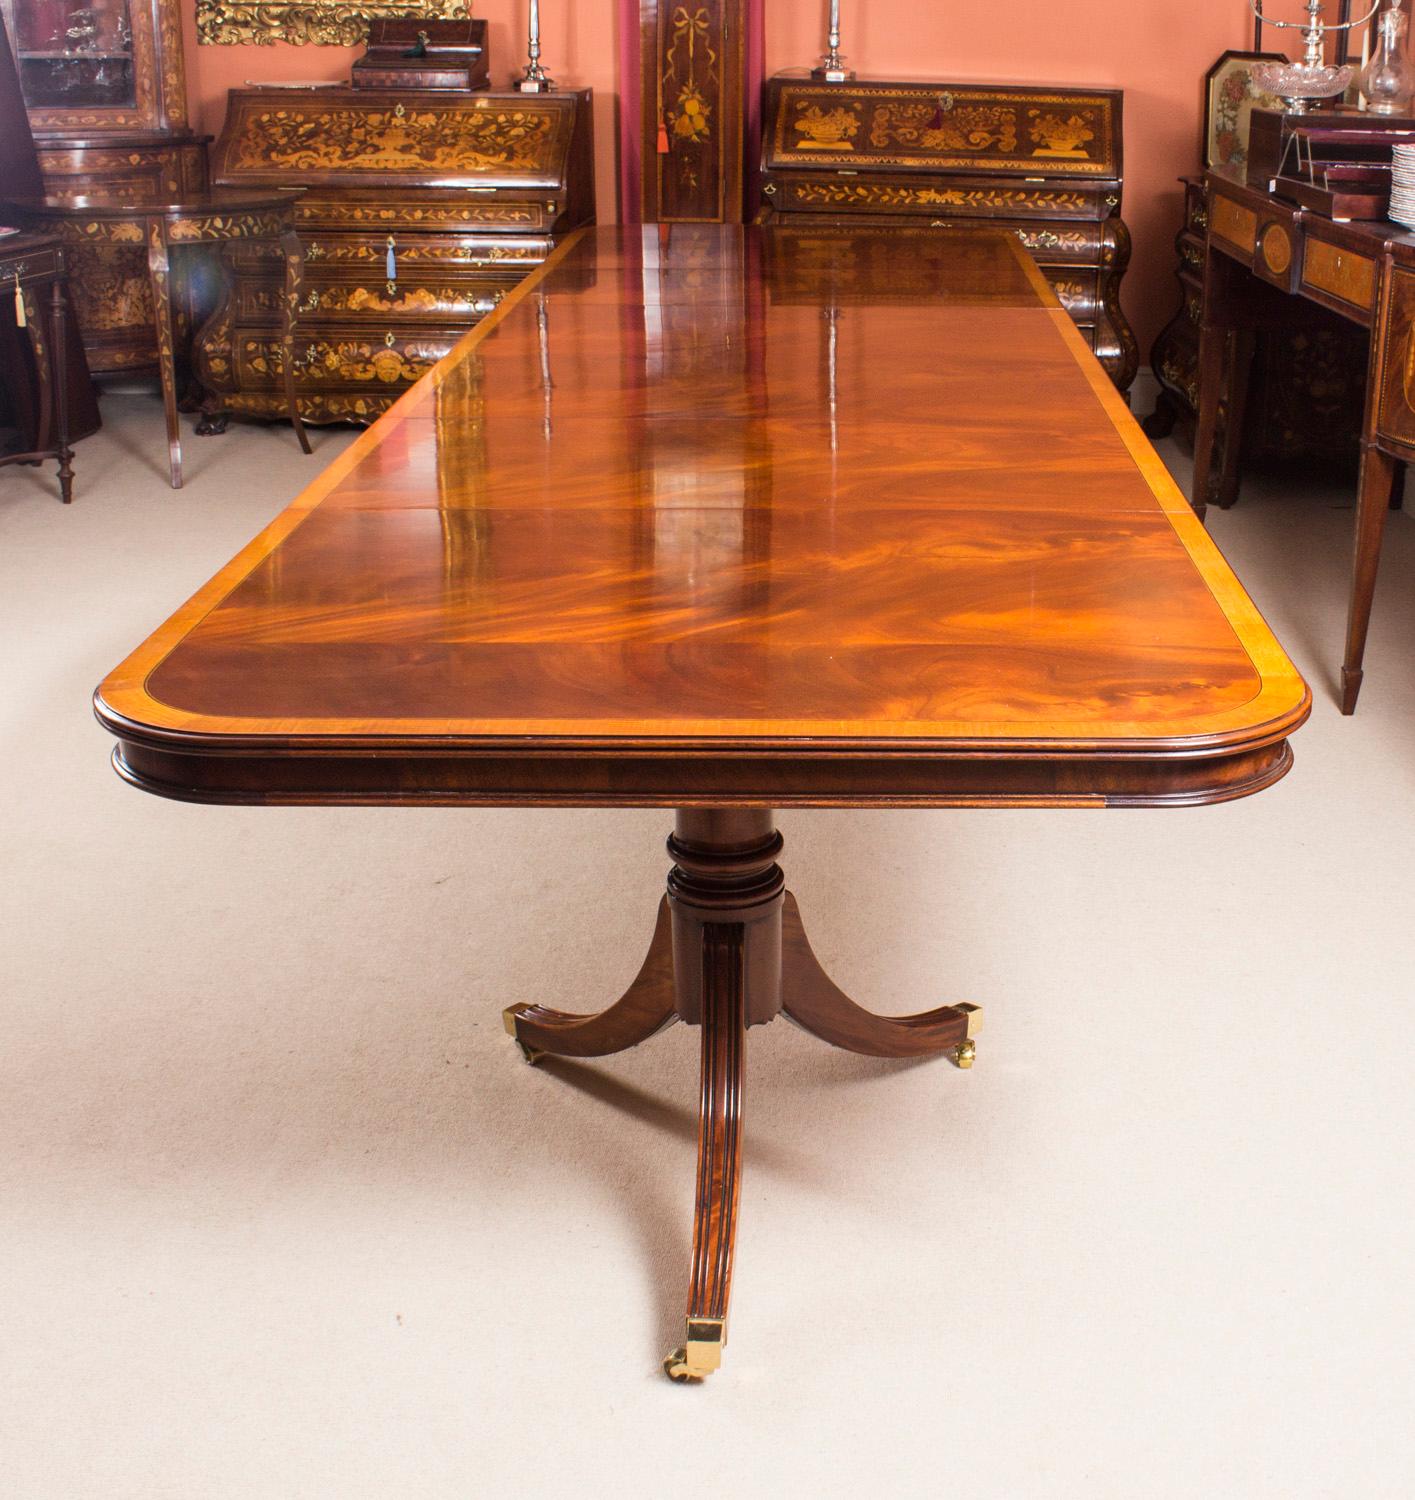 Vintage 14 ft Three Pillar Mahogany Dining Table and 16 Chairs 20th Century For Sale 3